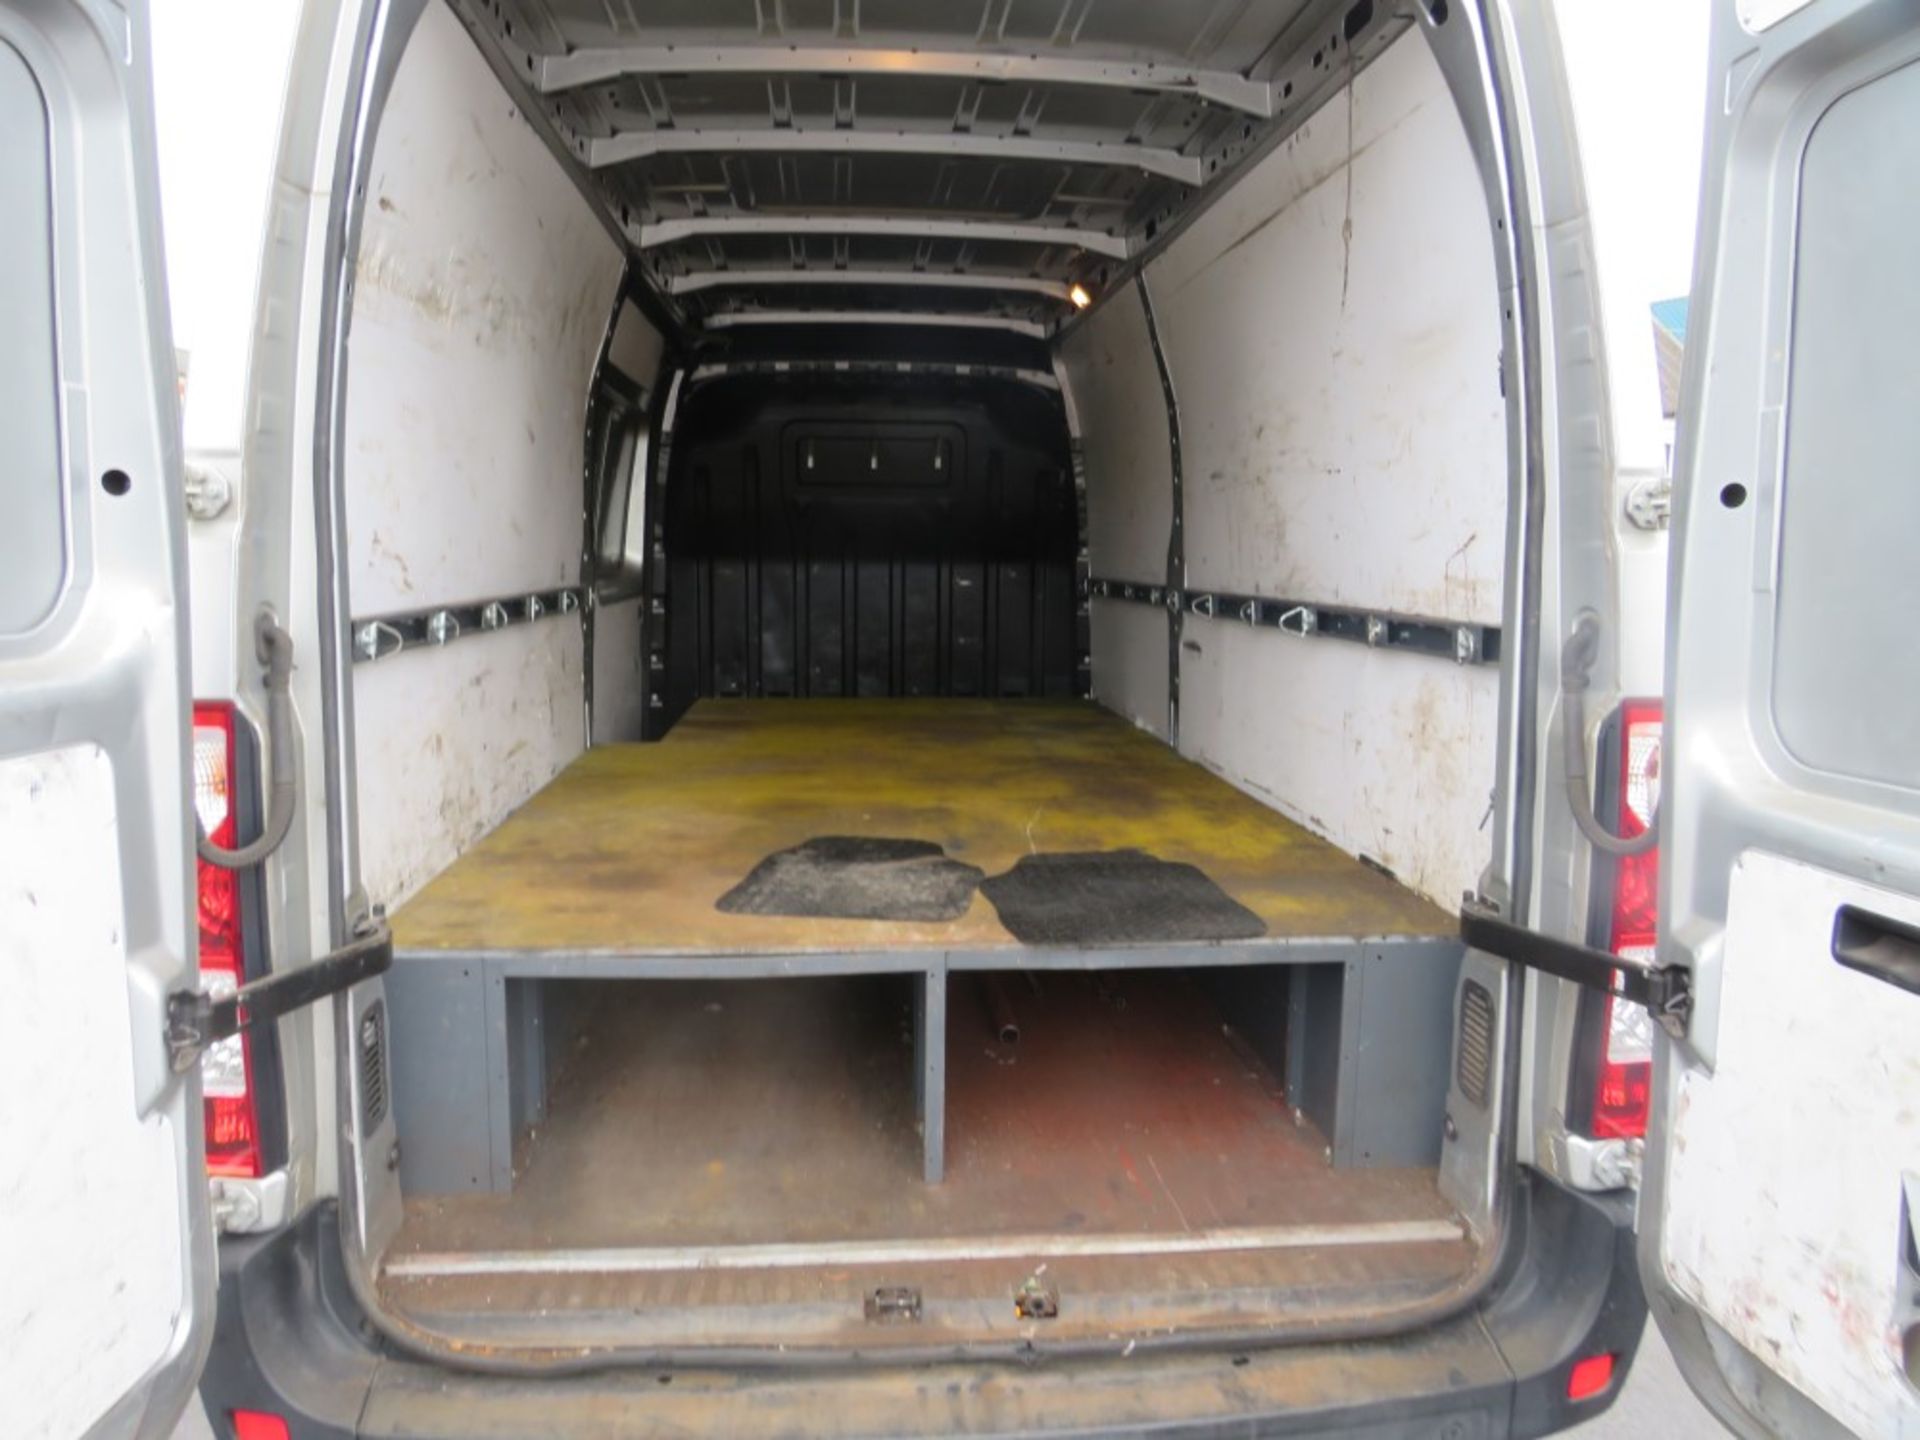 15 reg VAUXHALL MOVANO F3500 CDTI, 1ST REG 05/15, TEST 05/20, 106558M WARRANTED, V5 HERE, 1 OWNER - Image 5 of 6